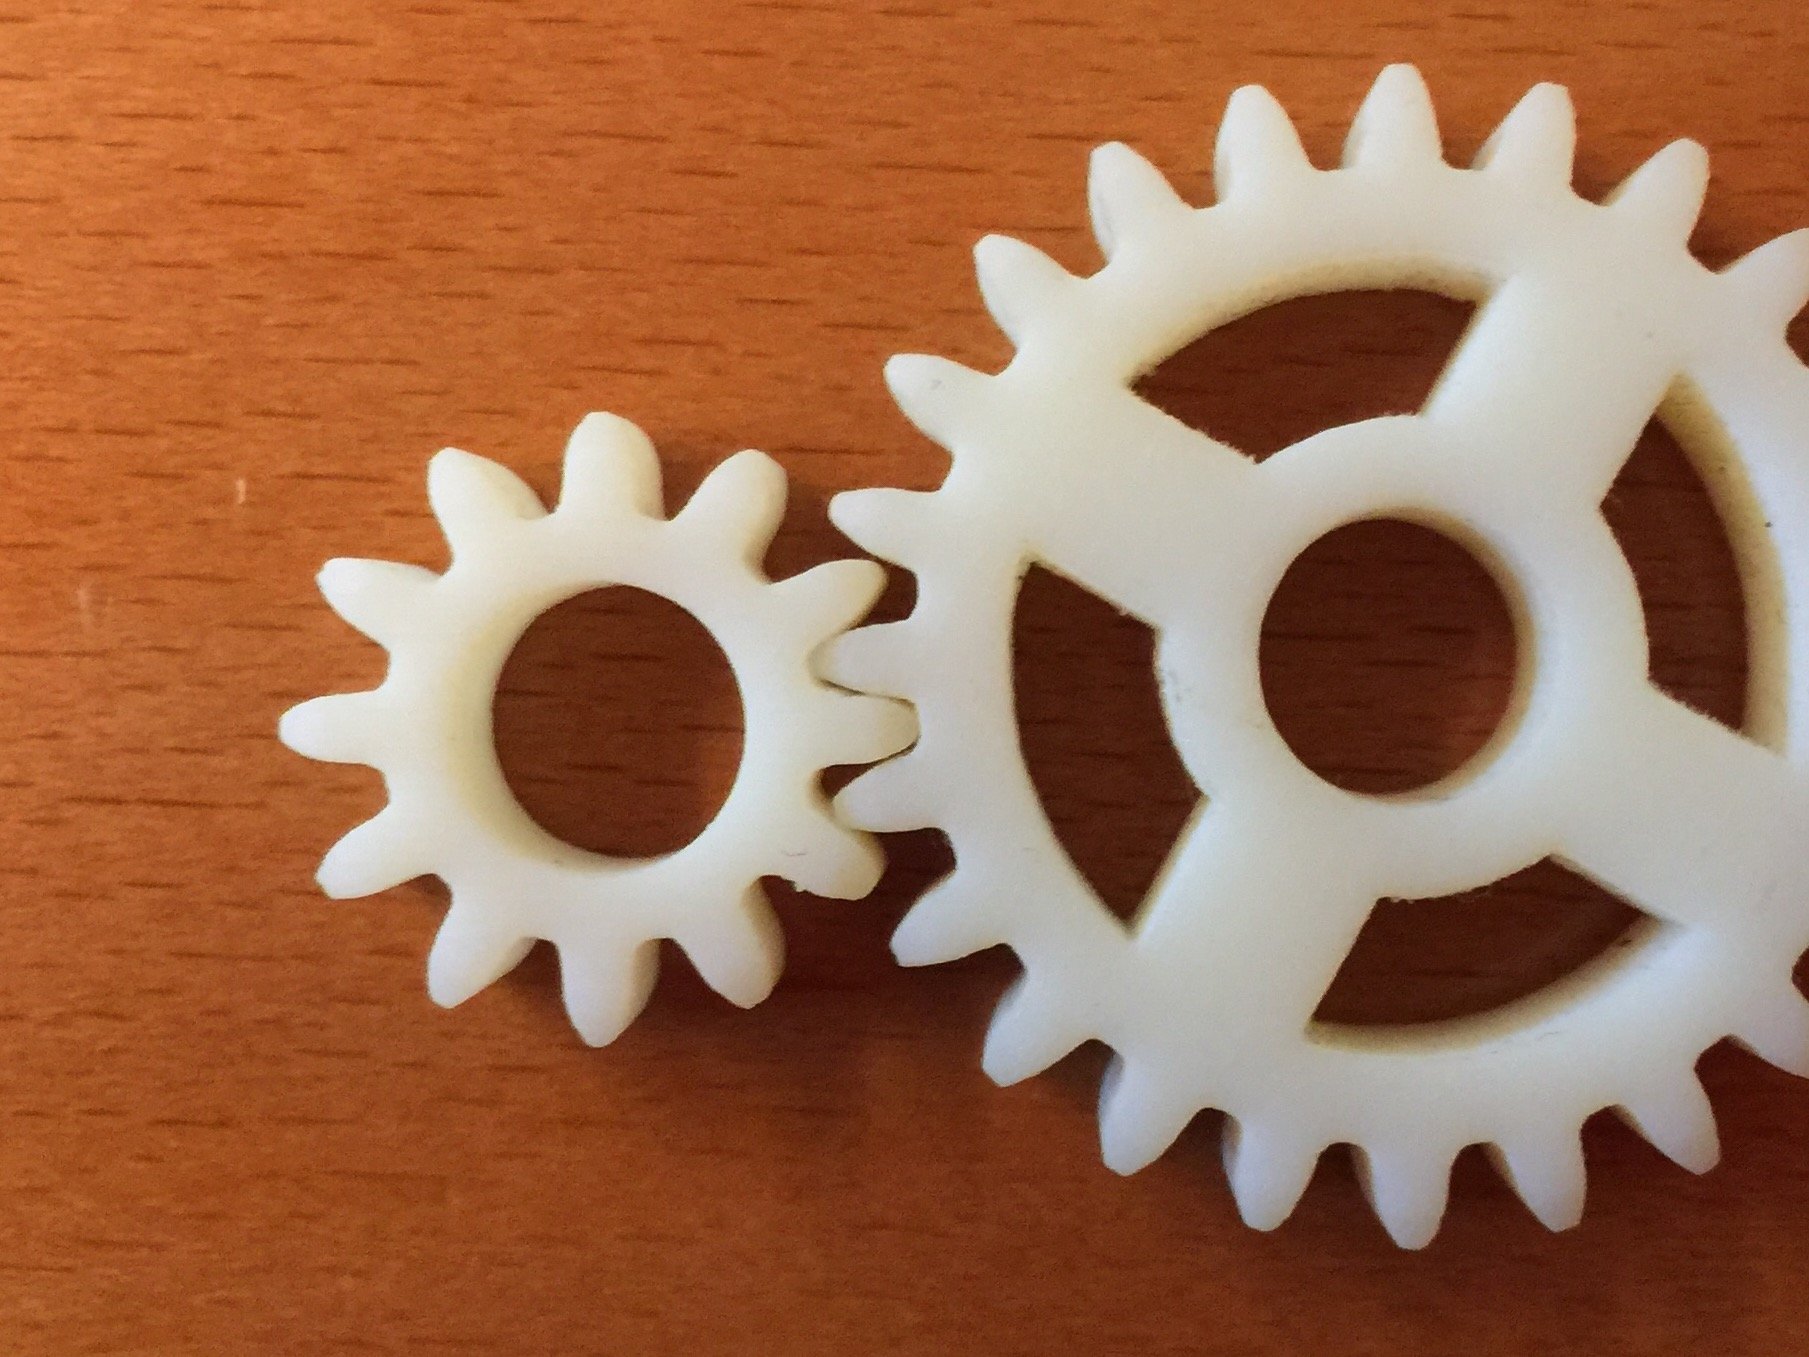 two gears operating at standard centre distance